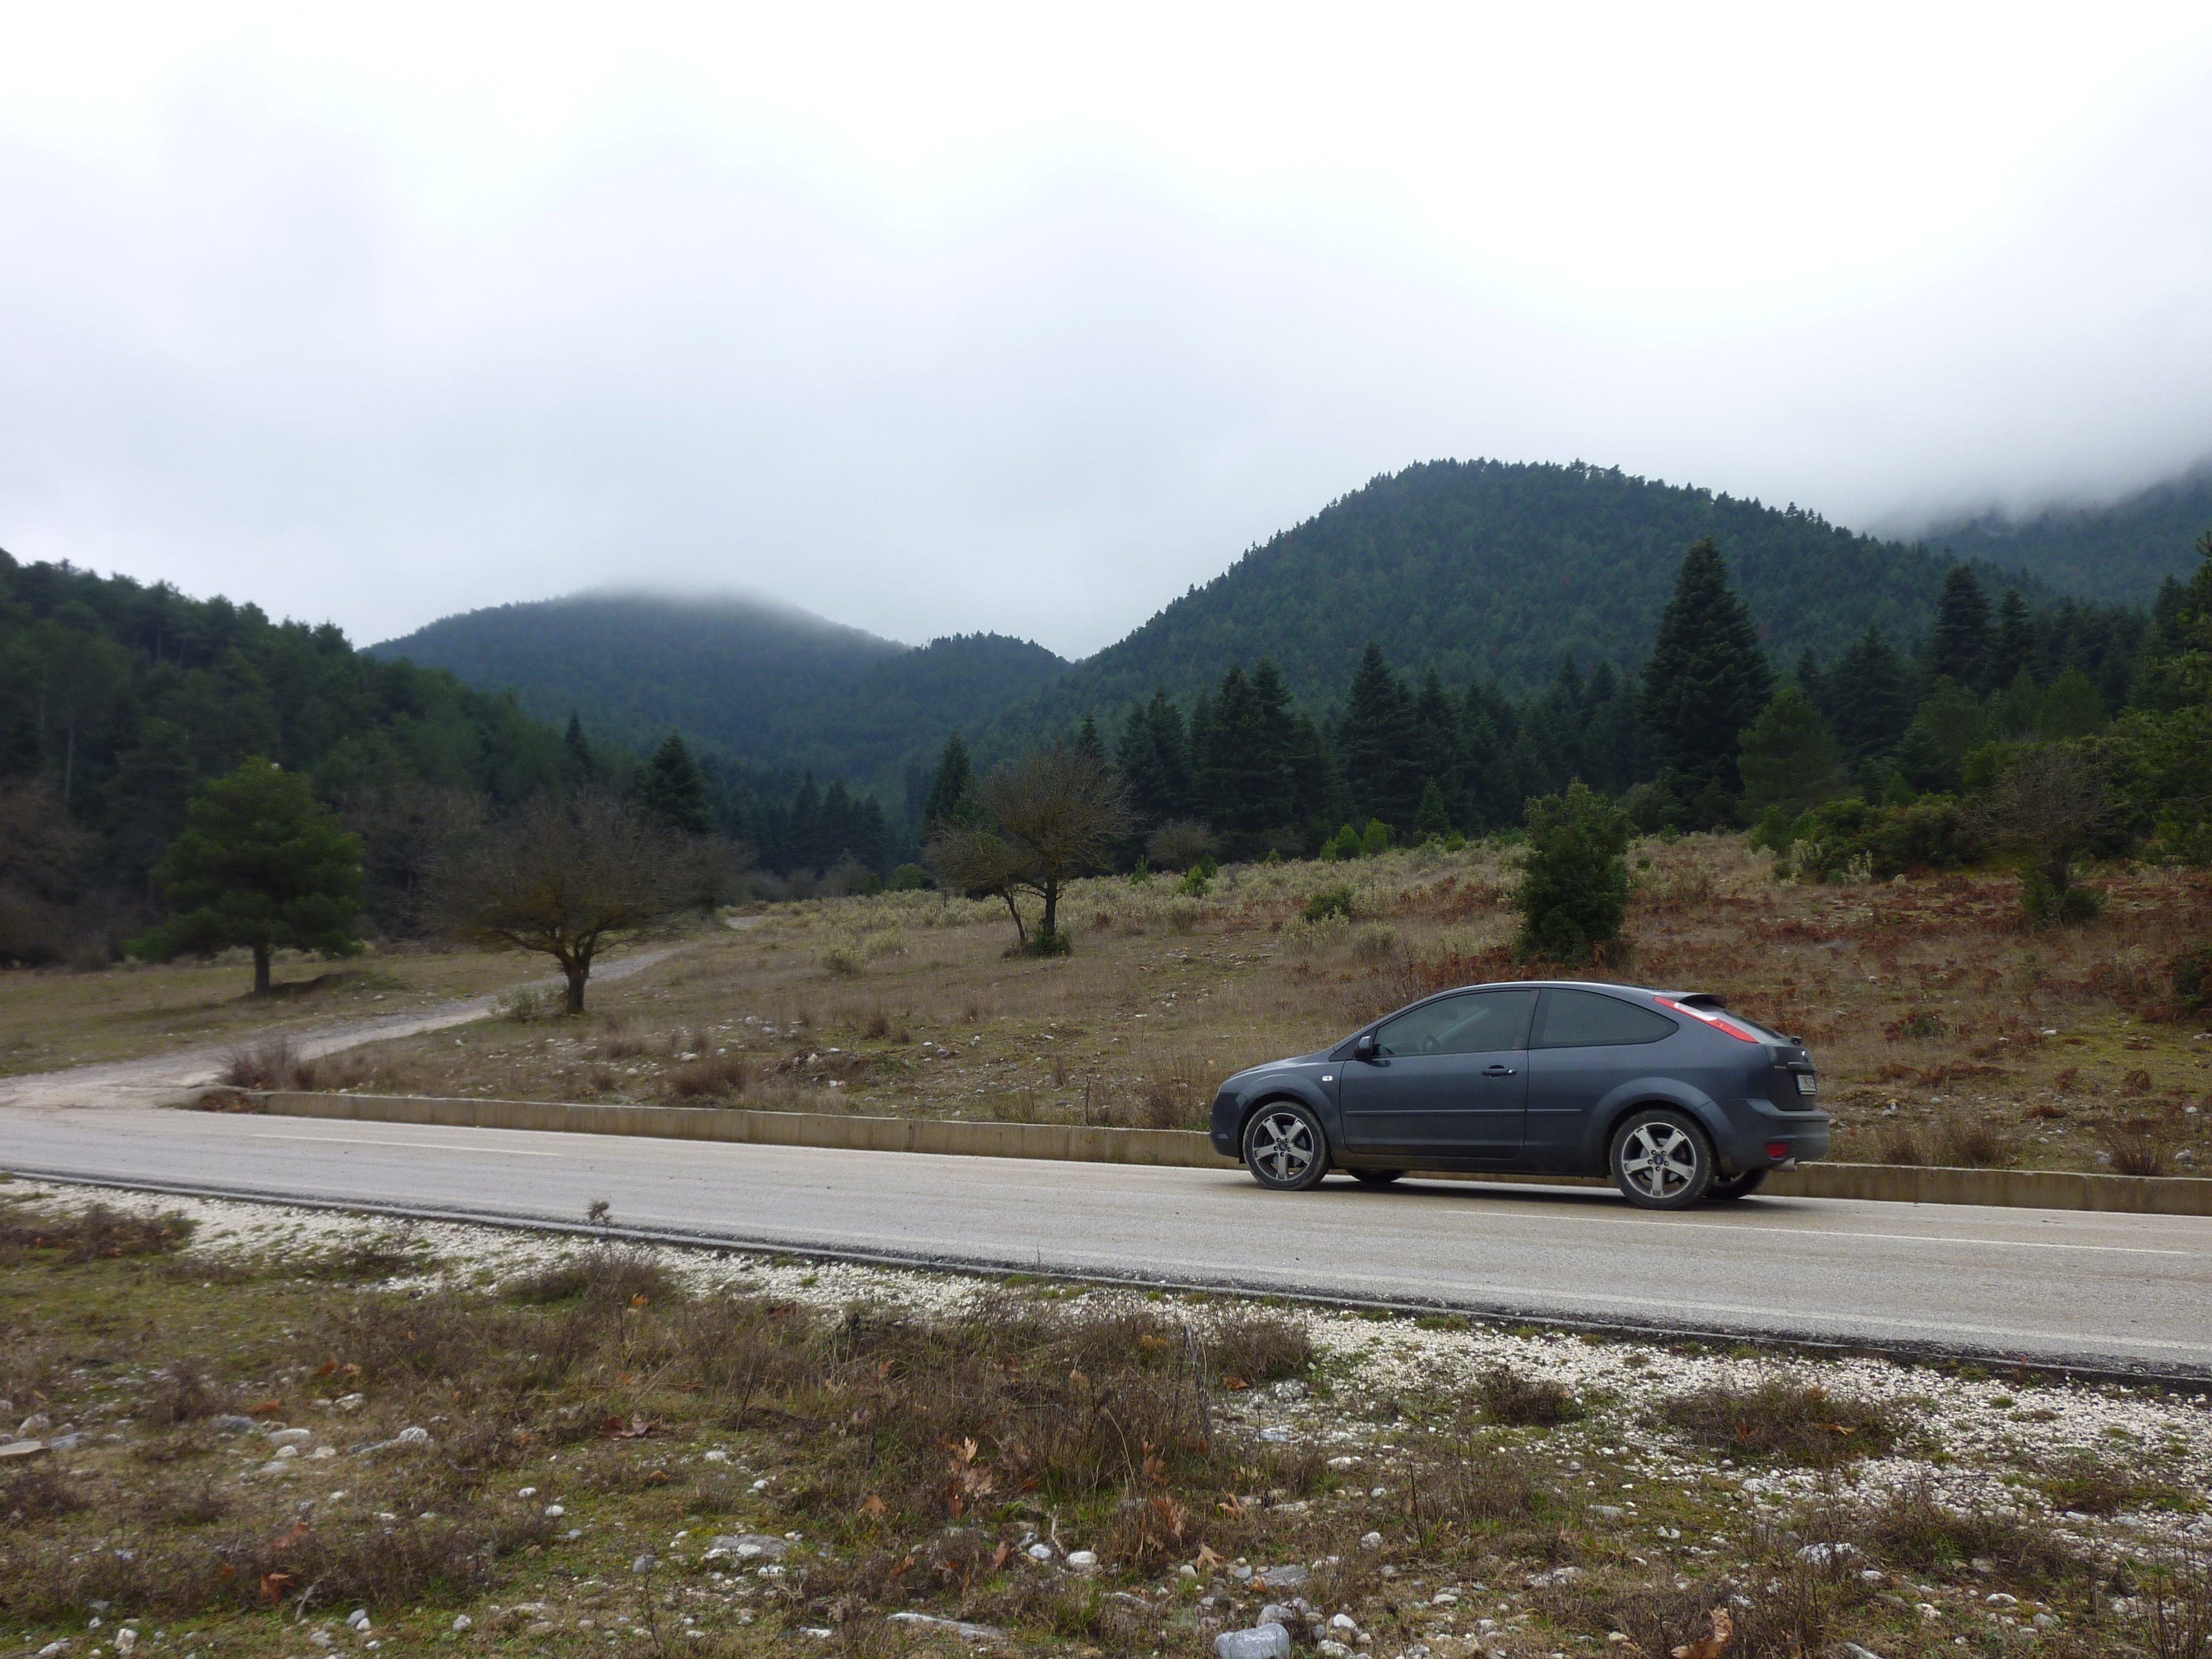 Ford, ford focus, mountains, transportation, car, motor vehicle